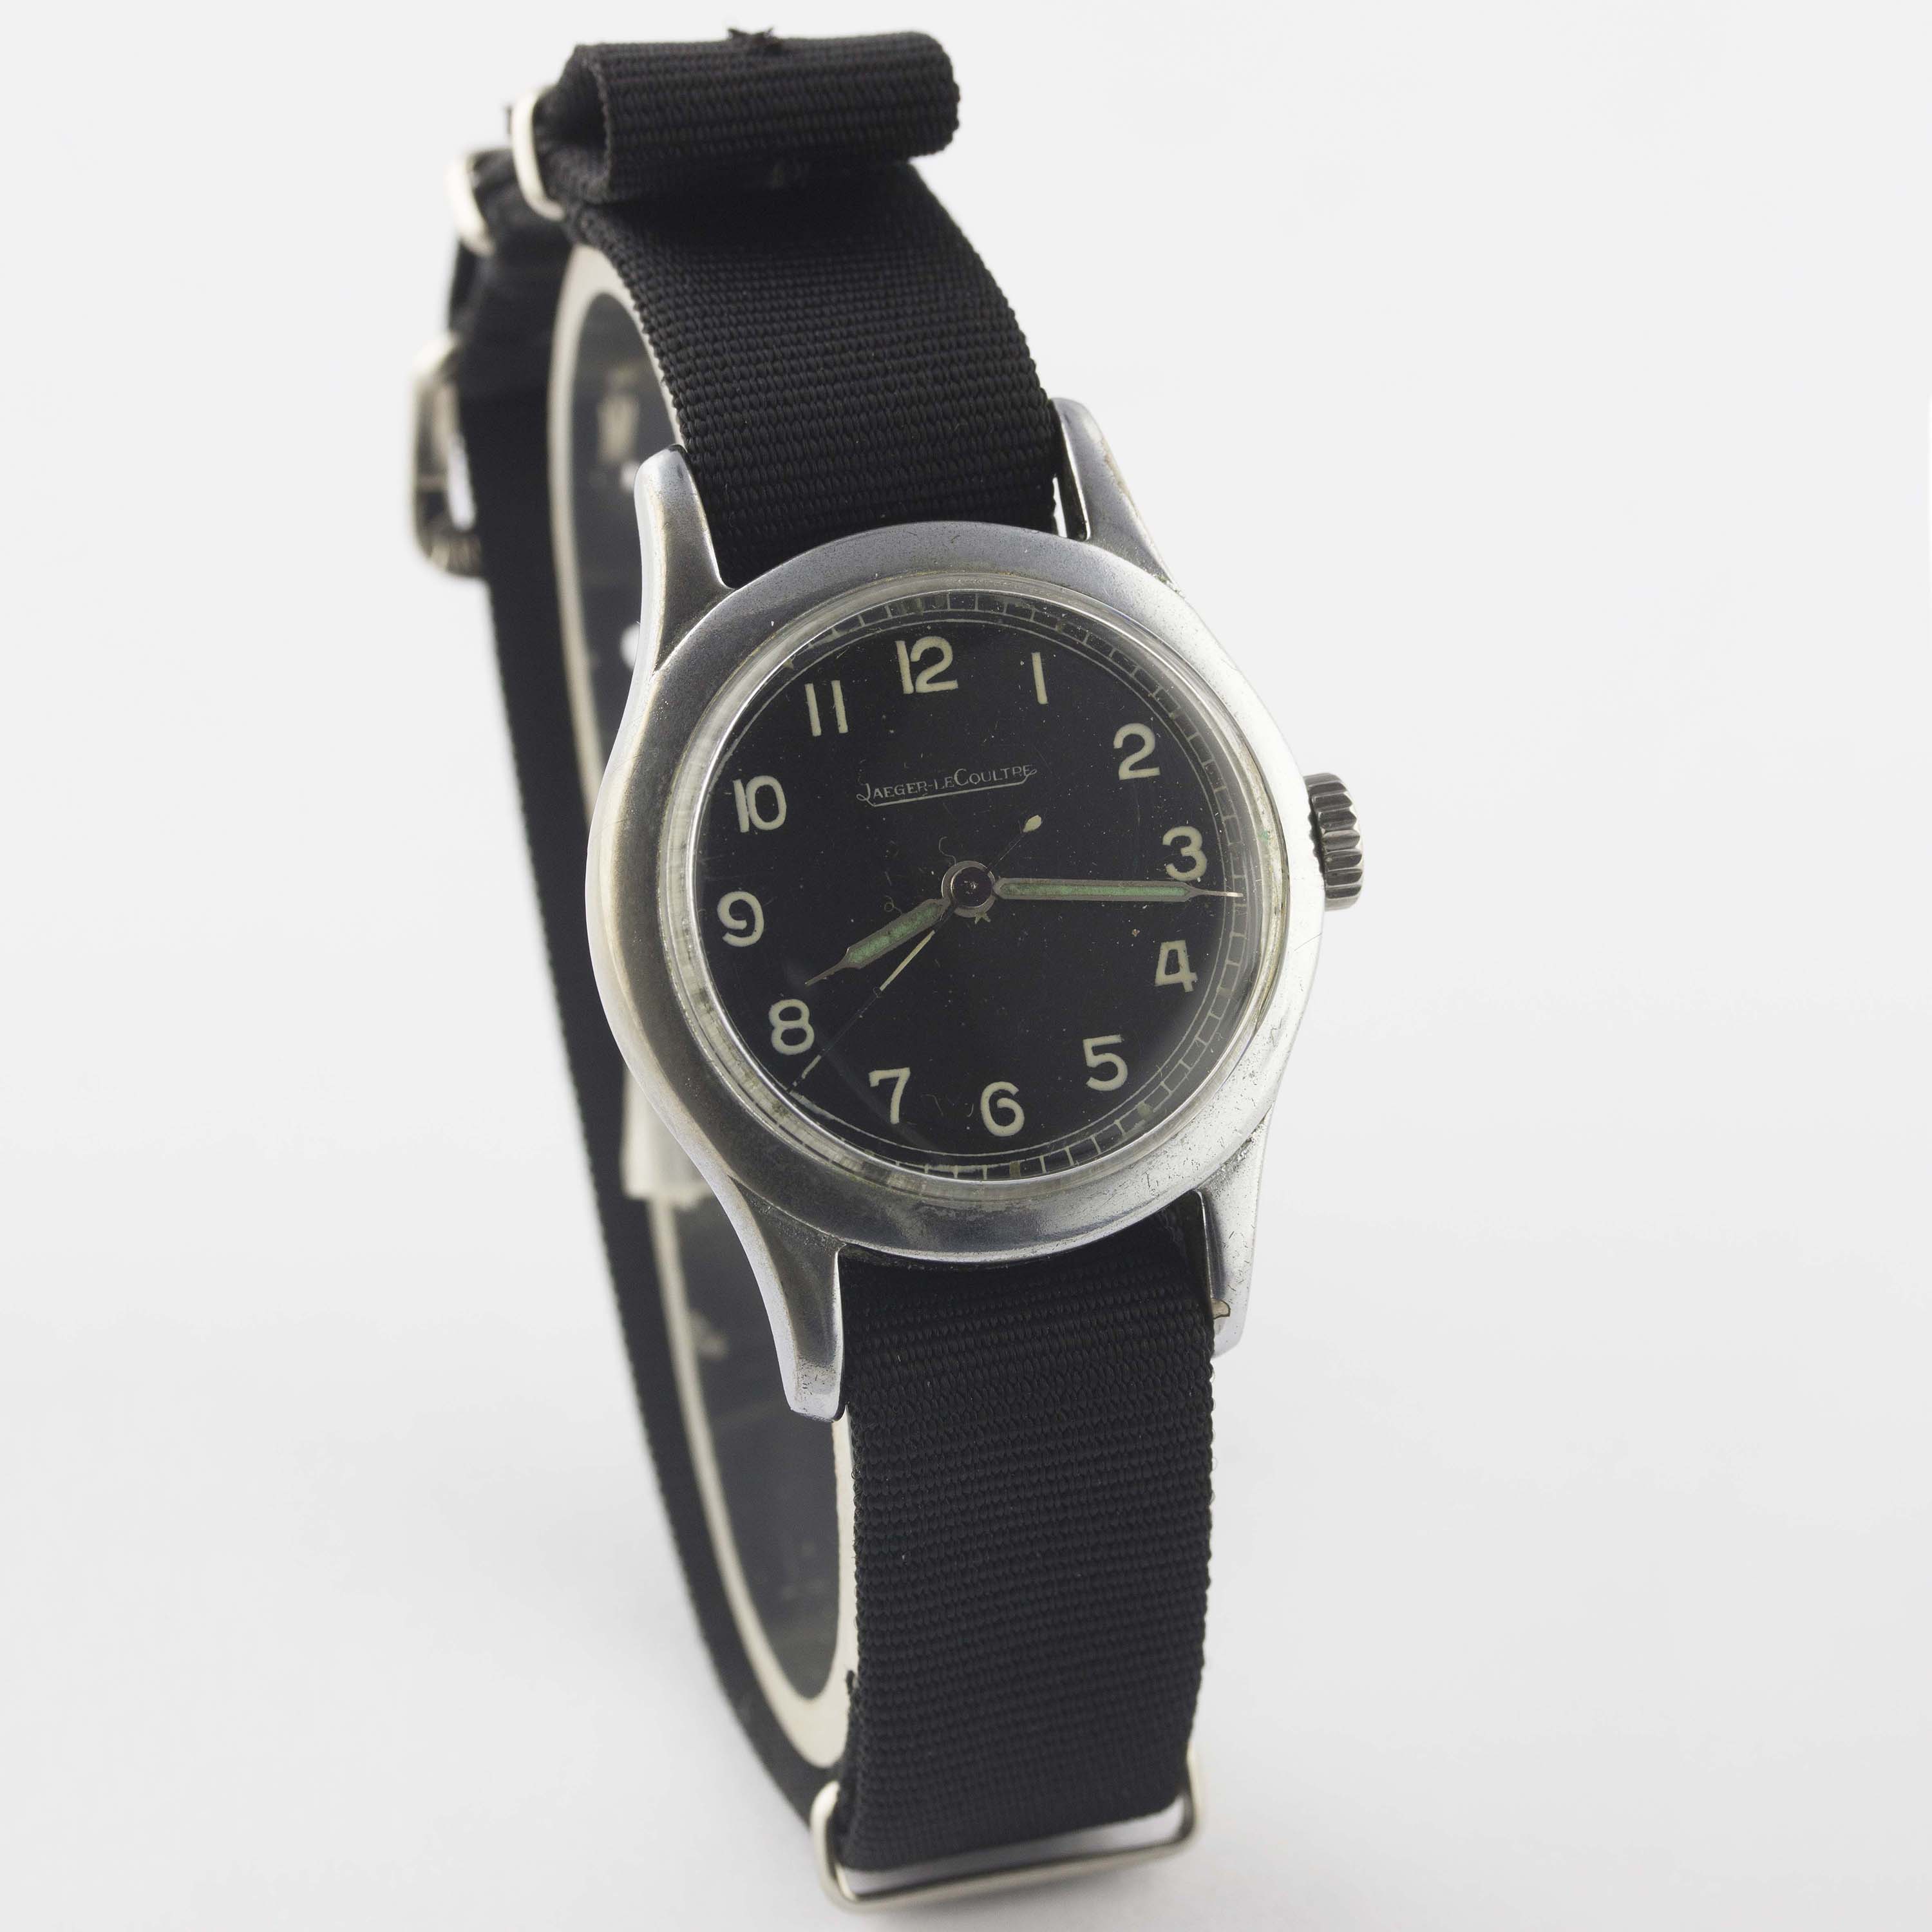 A GENTLEMAN'S BRITISH MILITARY JAEGER LECOULTRE RAF PILOTS WRIST WATCH CIRCA 1940, WITH BLACK MOD - Image 5 of 10